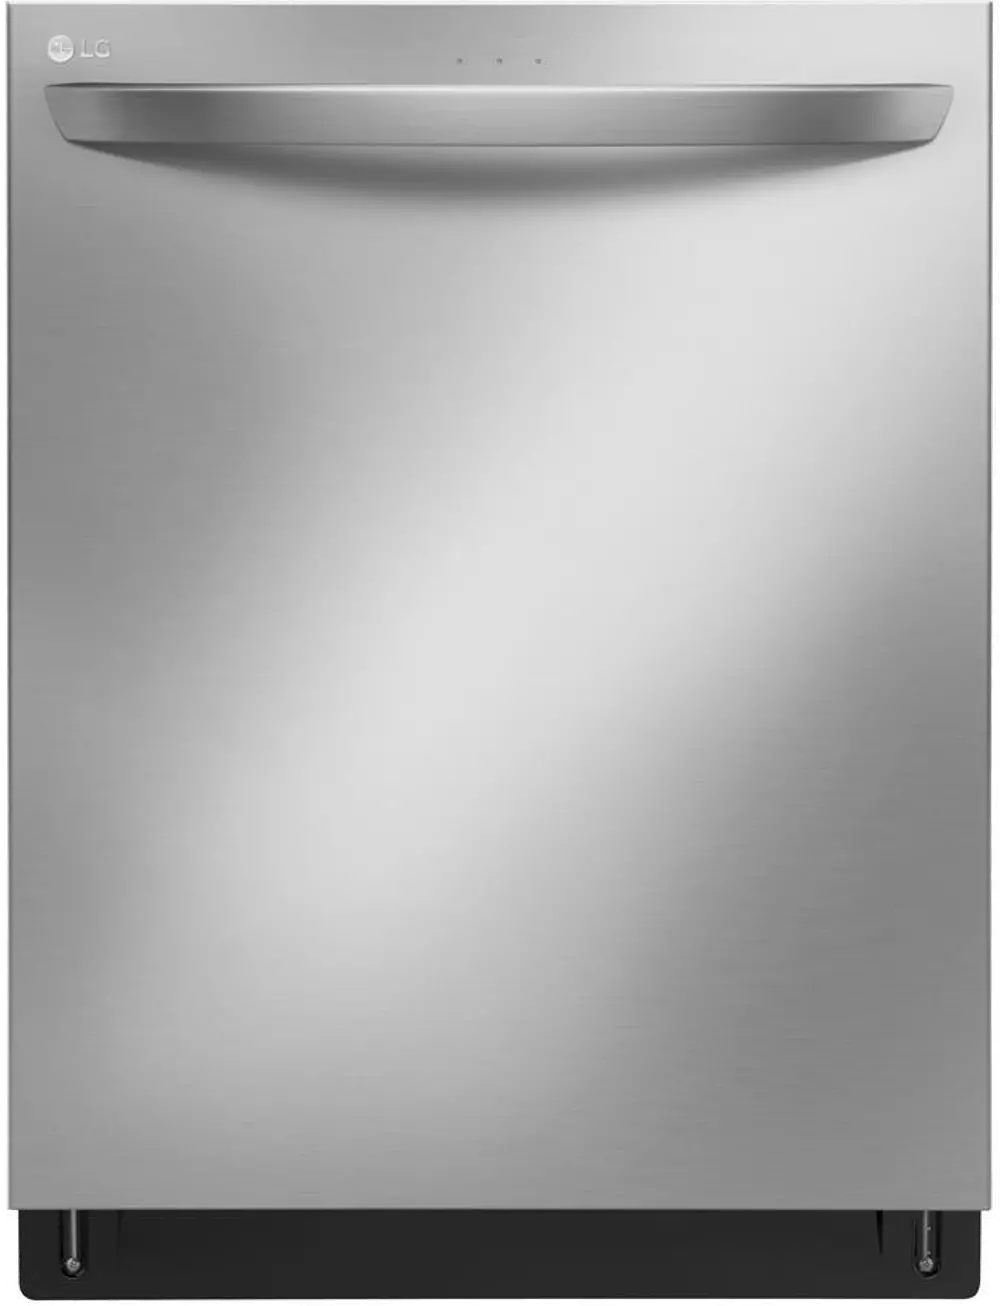 LDT7797ST LG Top Control Dishwasher with Third Rack - Stainless Steel-1